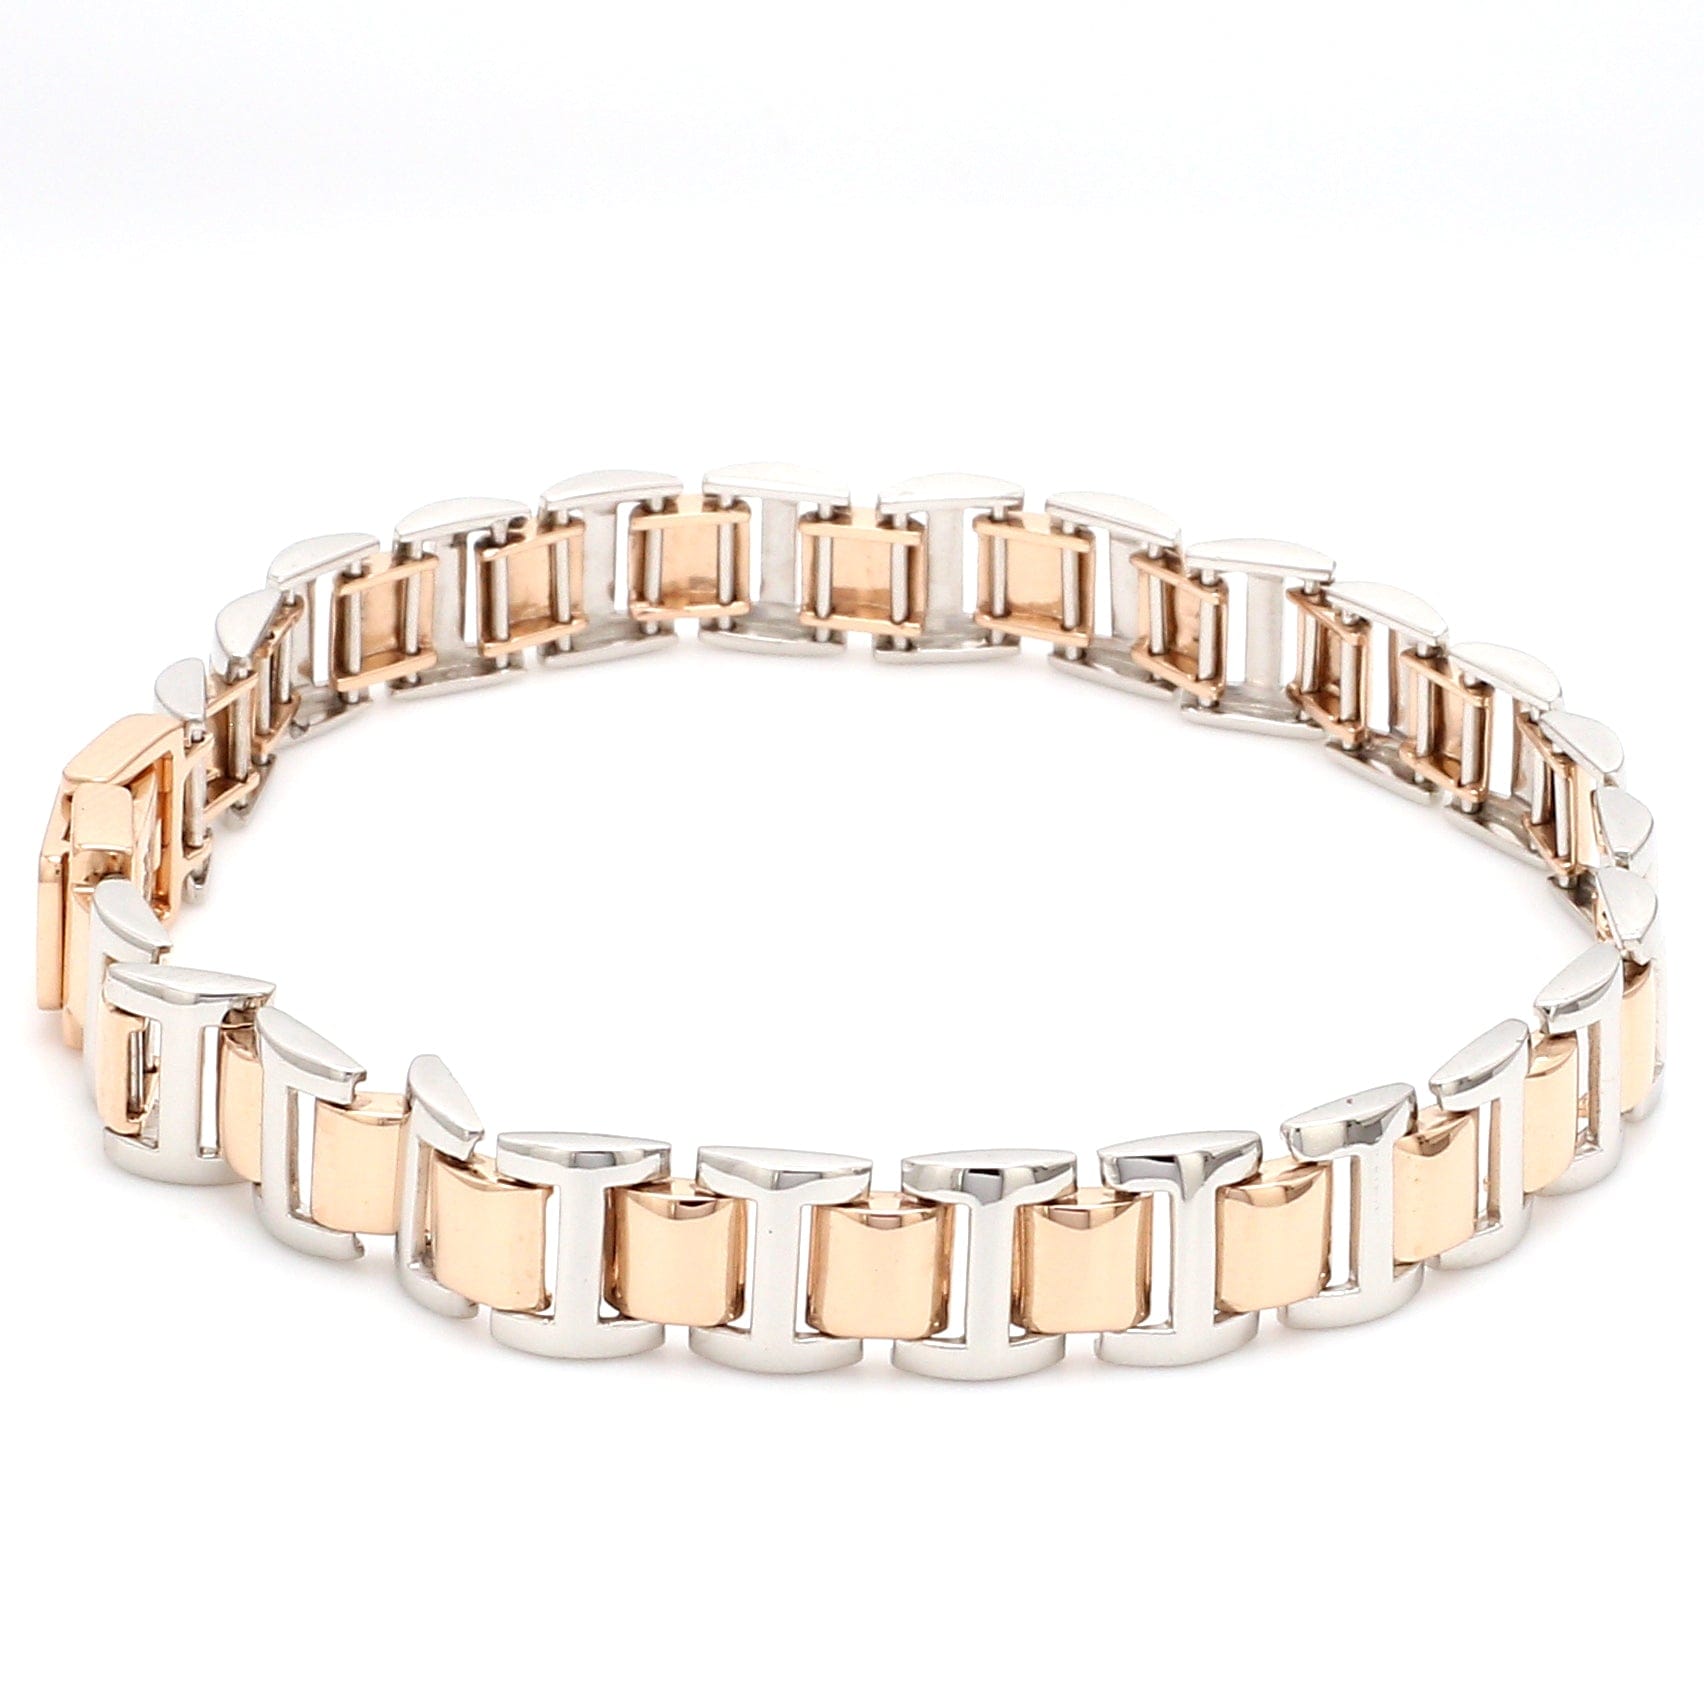 A Little Gold Never Hurt Anybody And Neither Do These Dainty Gold Bracelets